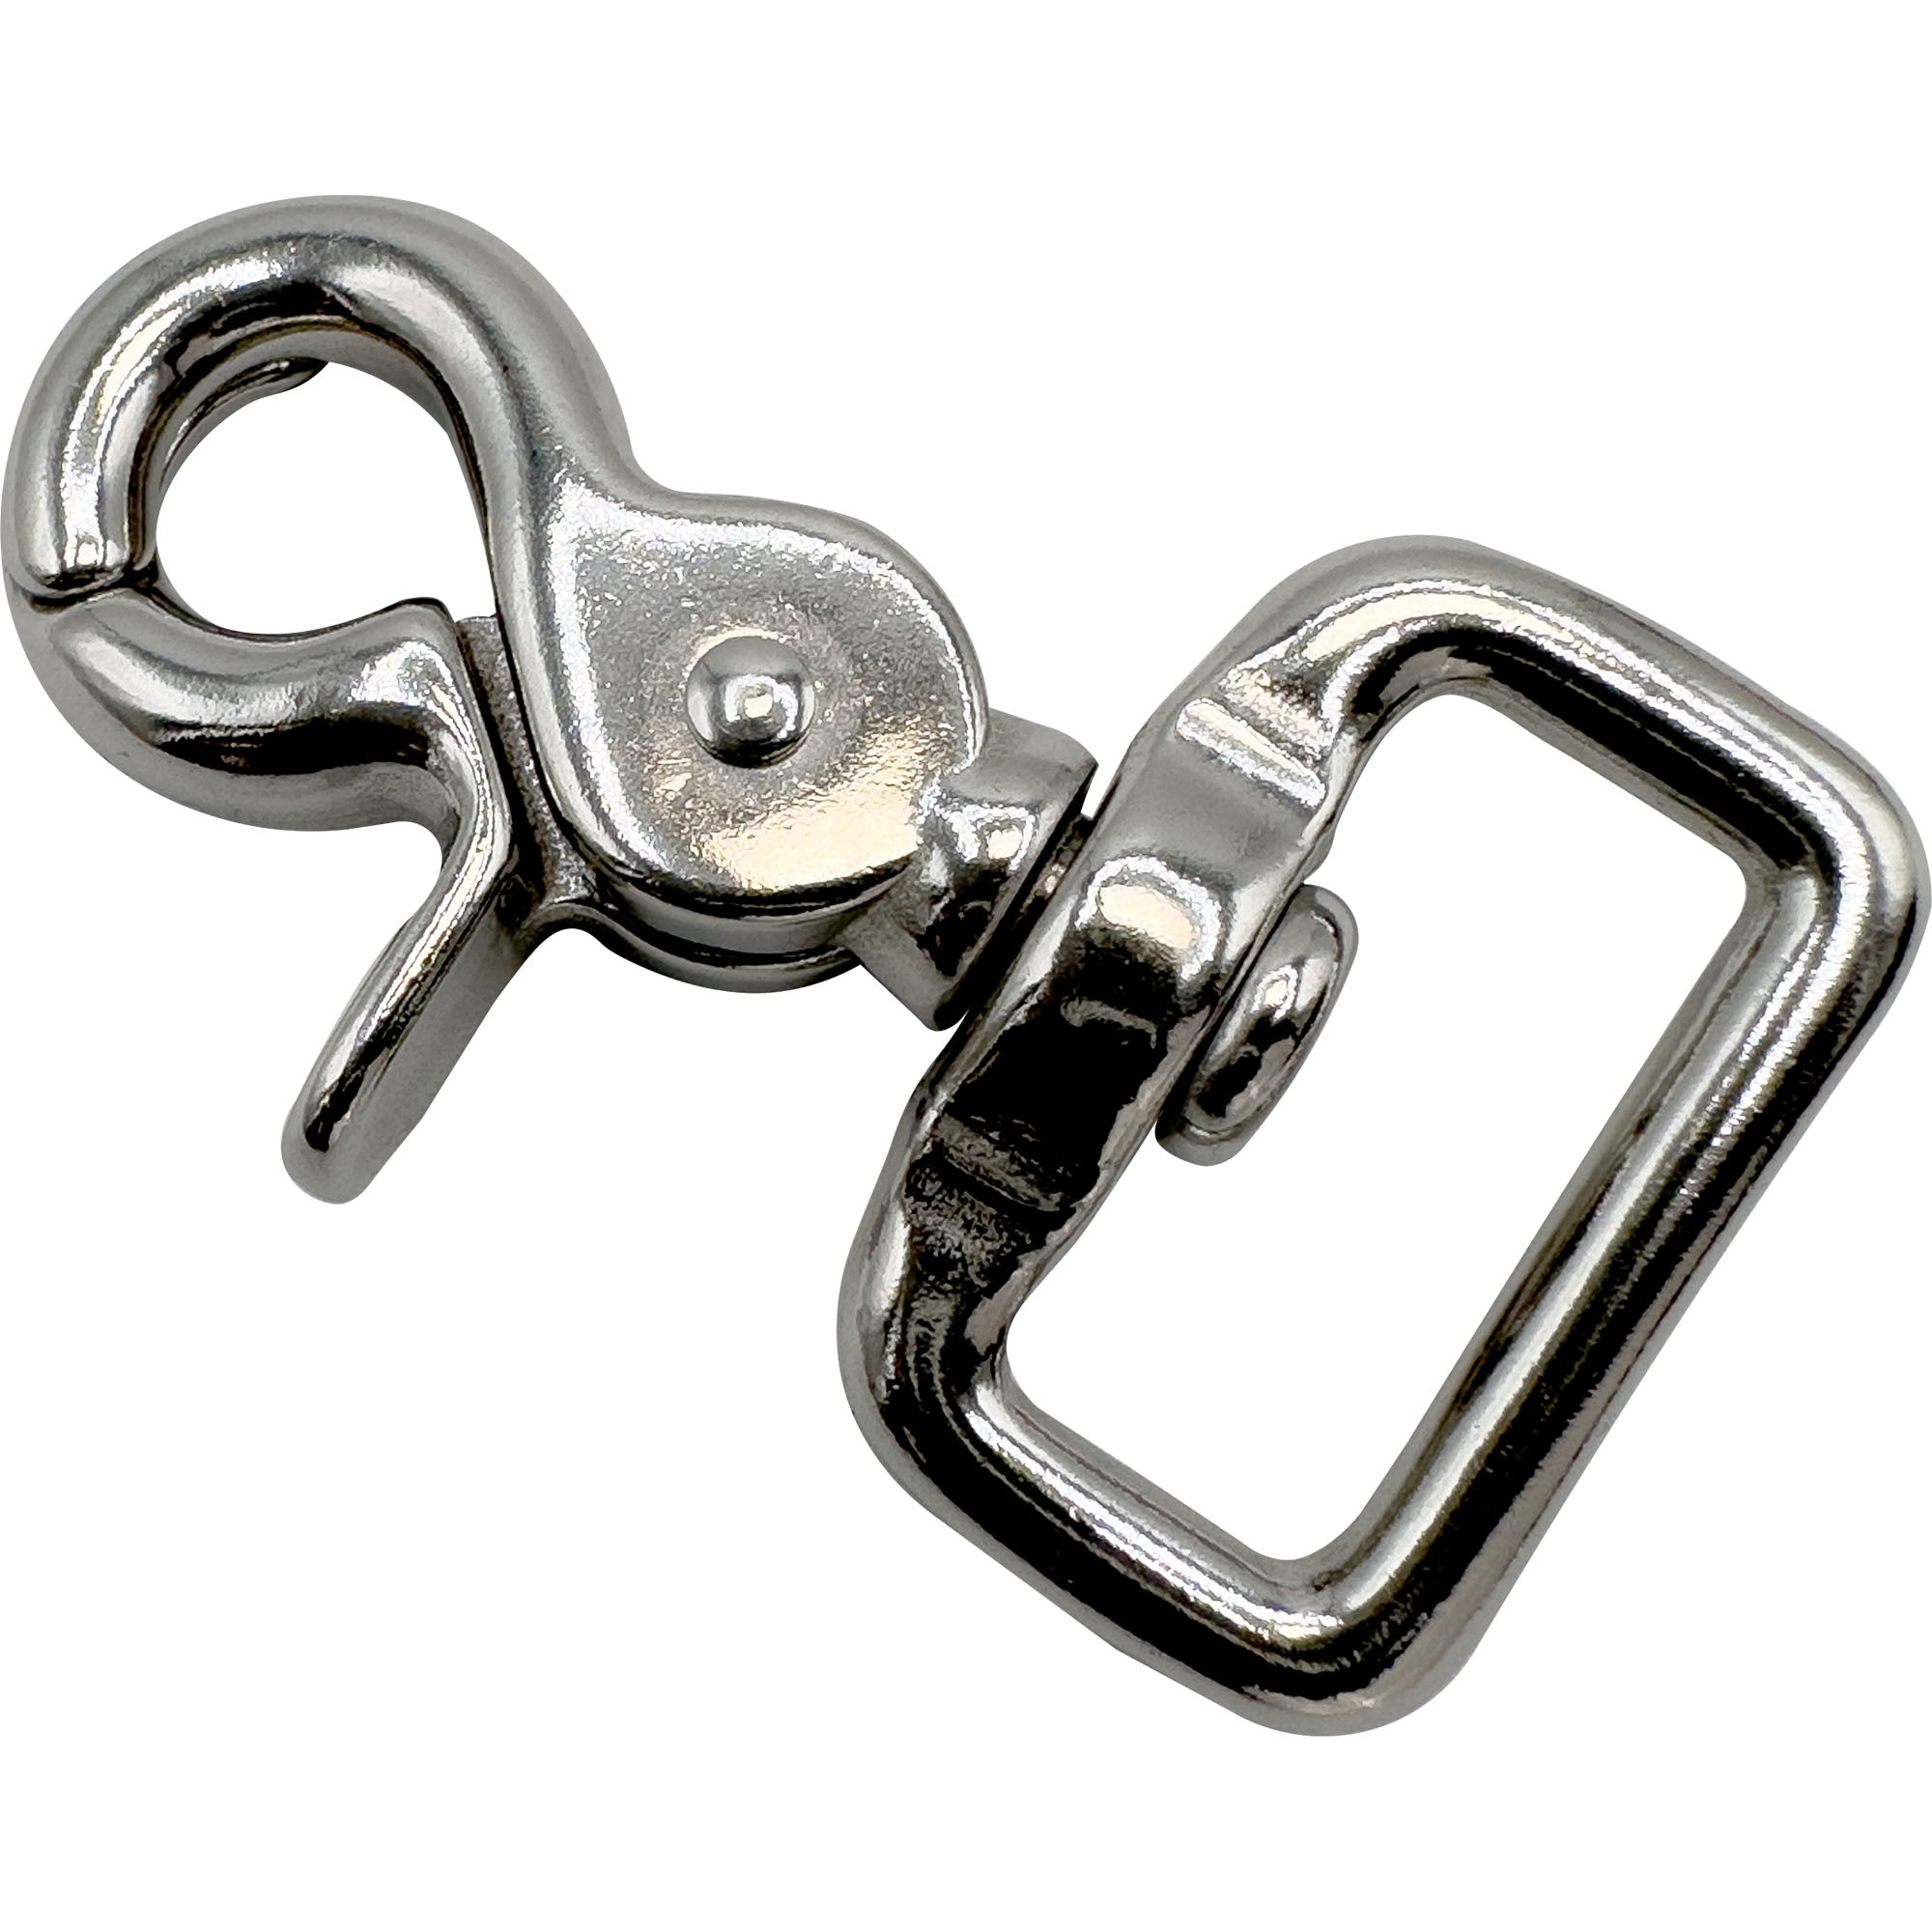 7023 Square Ring Cage Lock 1 Inch Stainless Steel